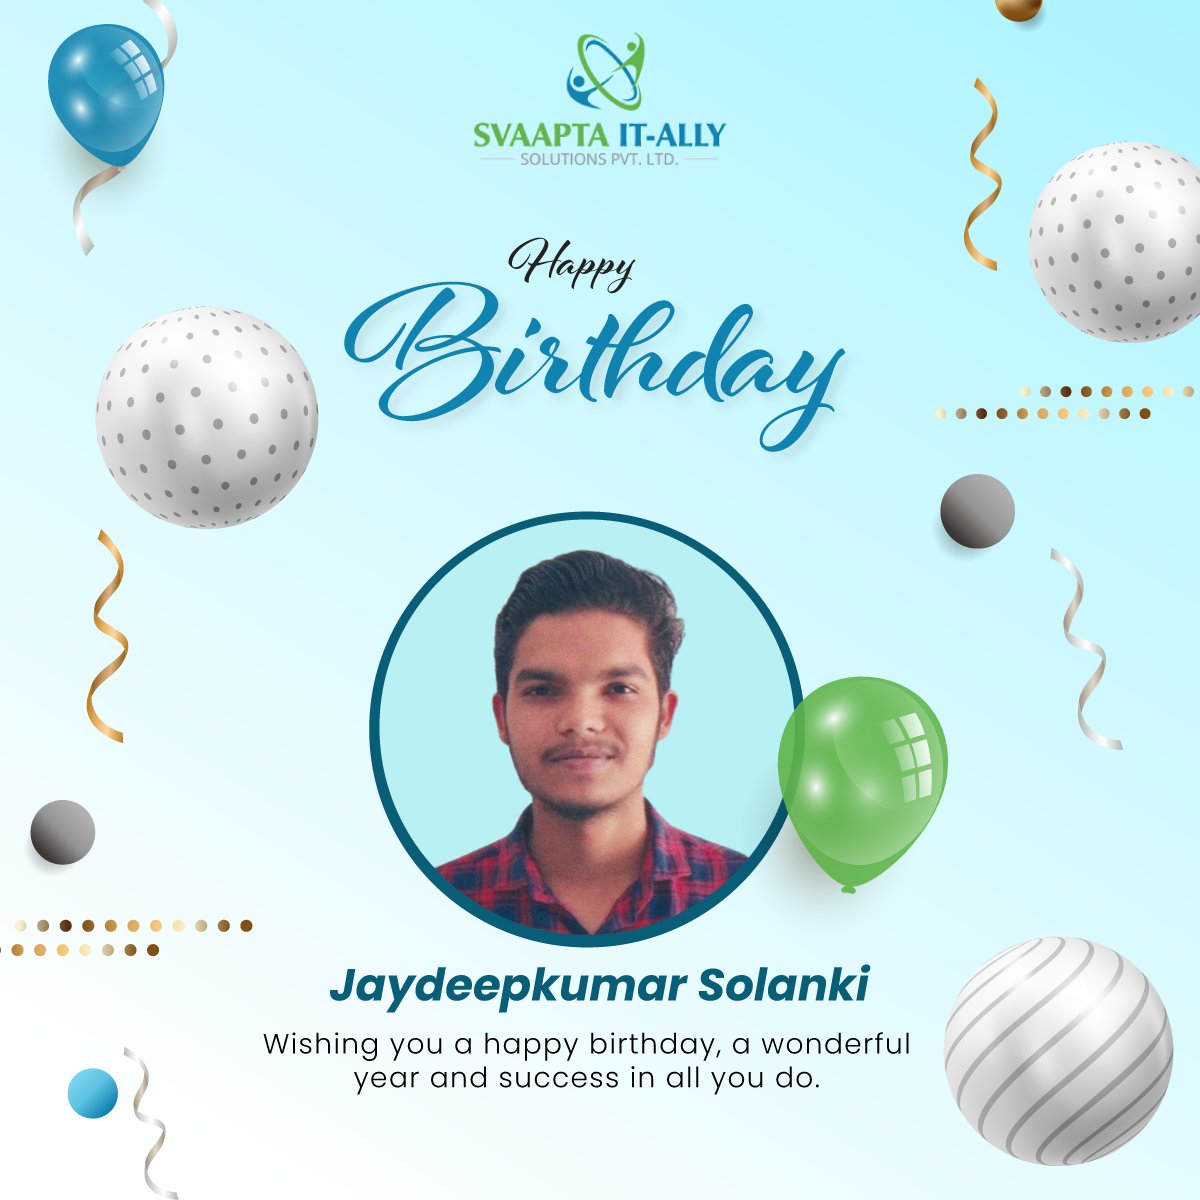 Happy Birthday, Jaydeep Solanki 🎉🥳 From the entire team at @svaapta_it_ally  May this year bring you endless opportunities, success, and happiness. Here's to another fantastic year ahead! 🎂🎈

#birthdaywishes #birthdayboy #birthdaycelebrations #employeebirthday #svaaptaitally